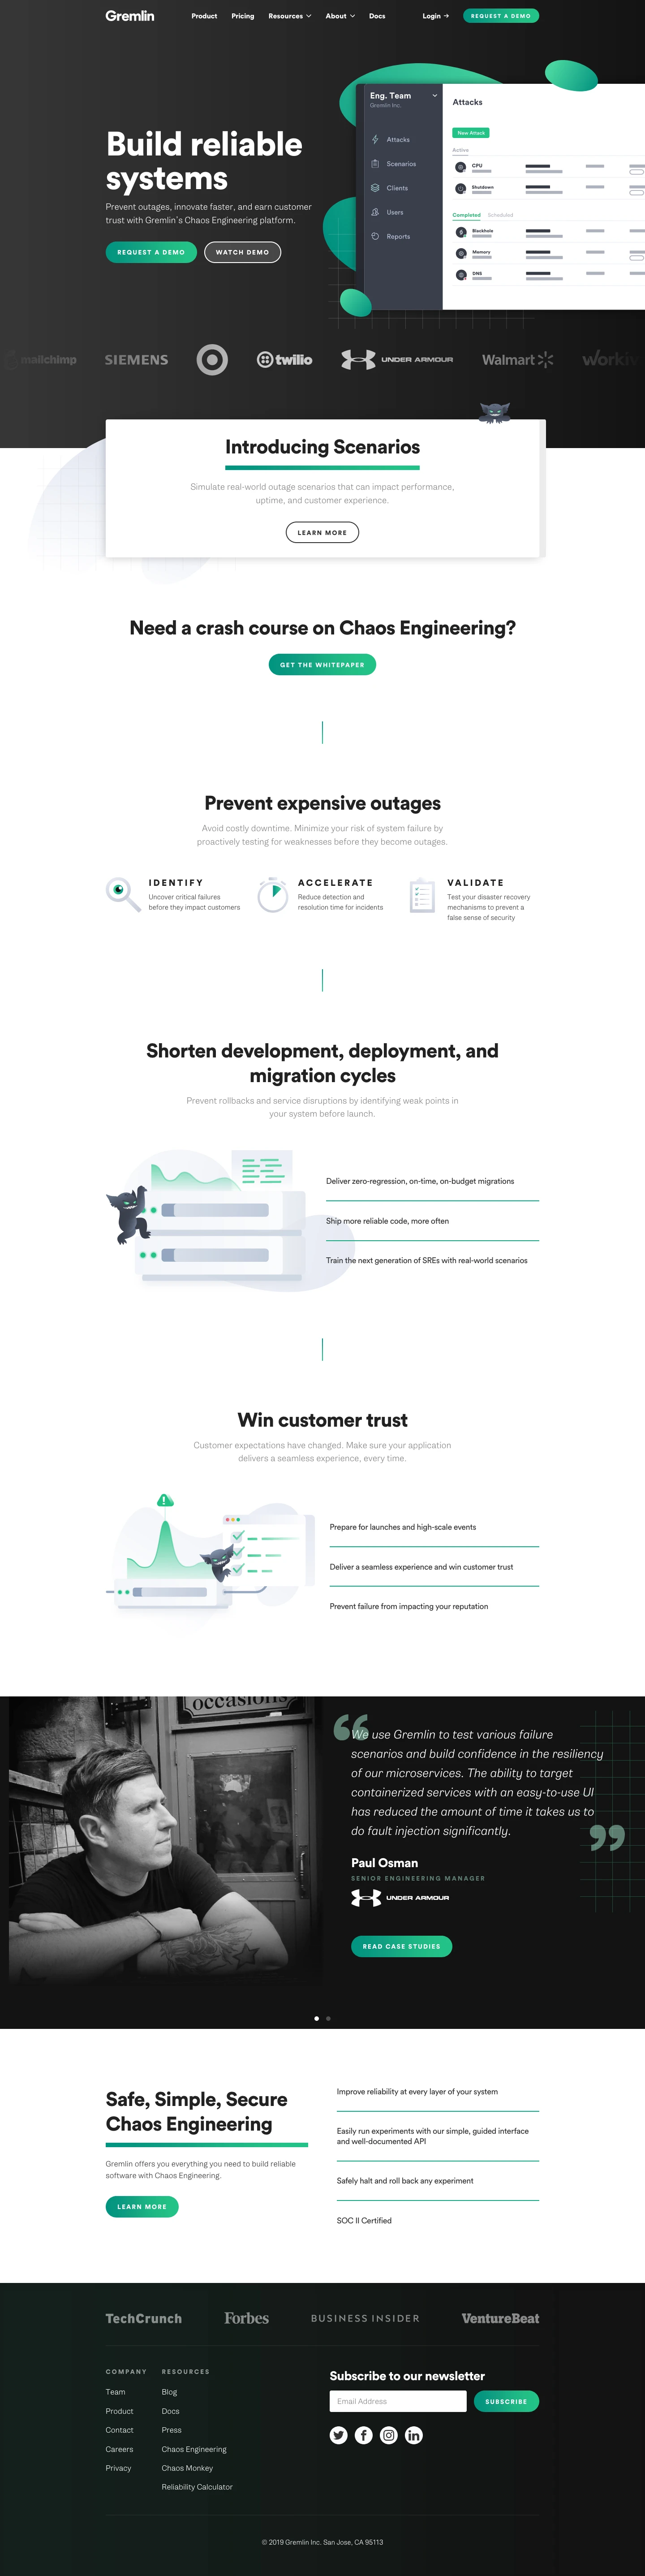 Gremlin Landing Page Example: Prevent outages, innovate faster, and earn customer trust with Gremlin’s Chaos Engineering platform.